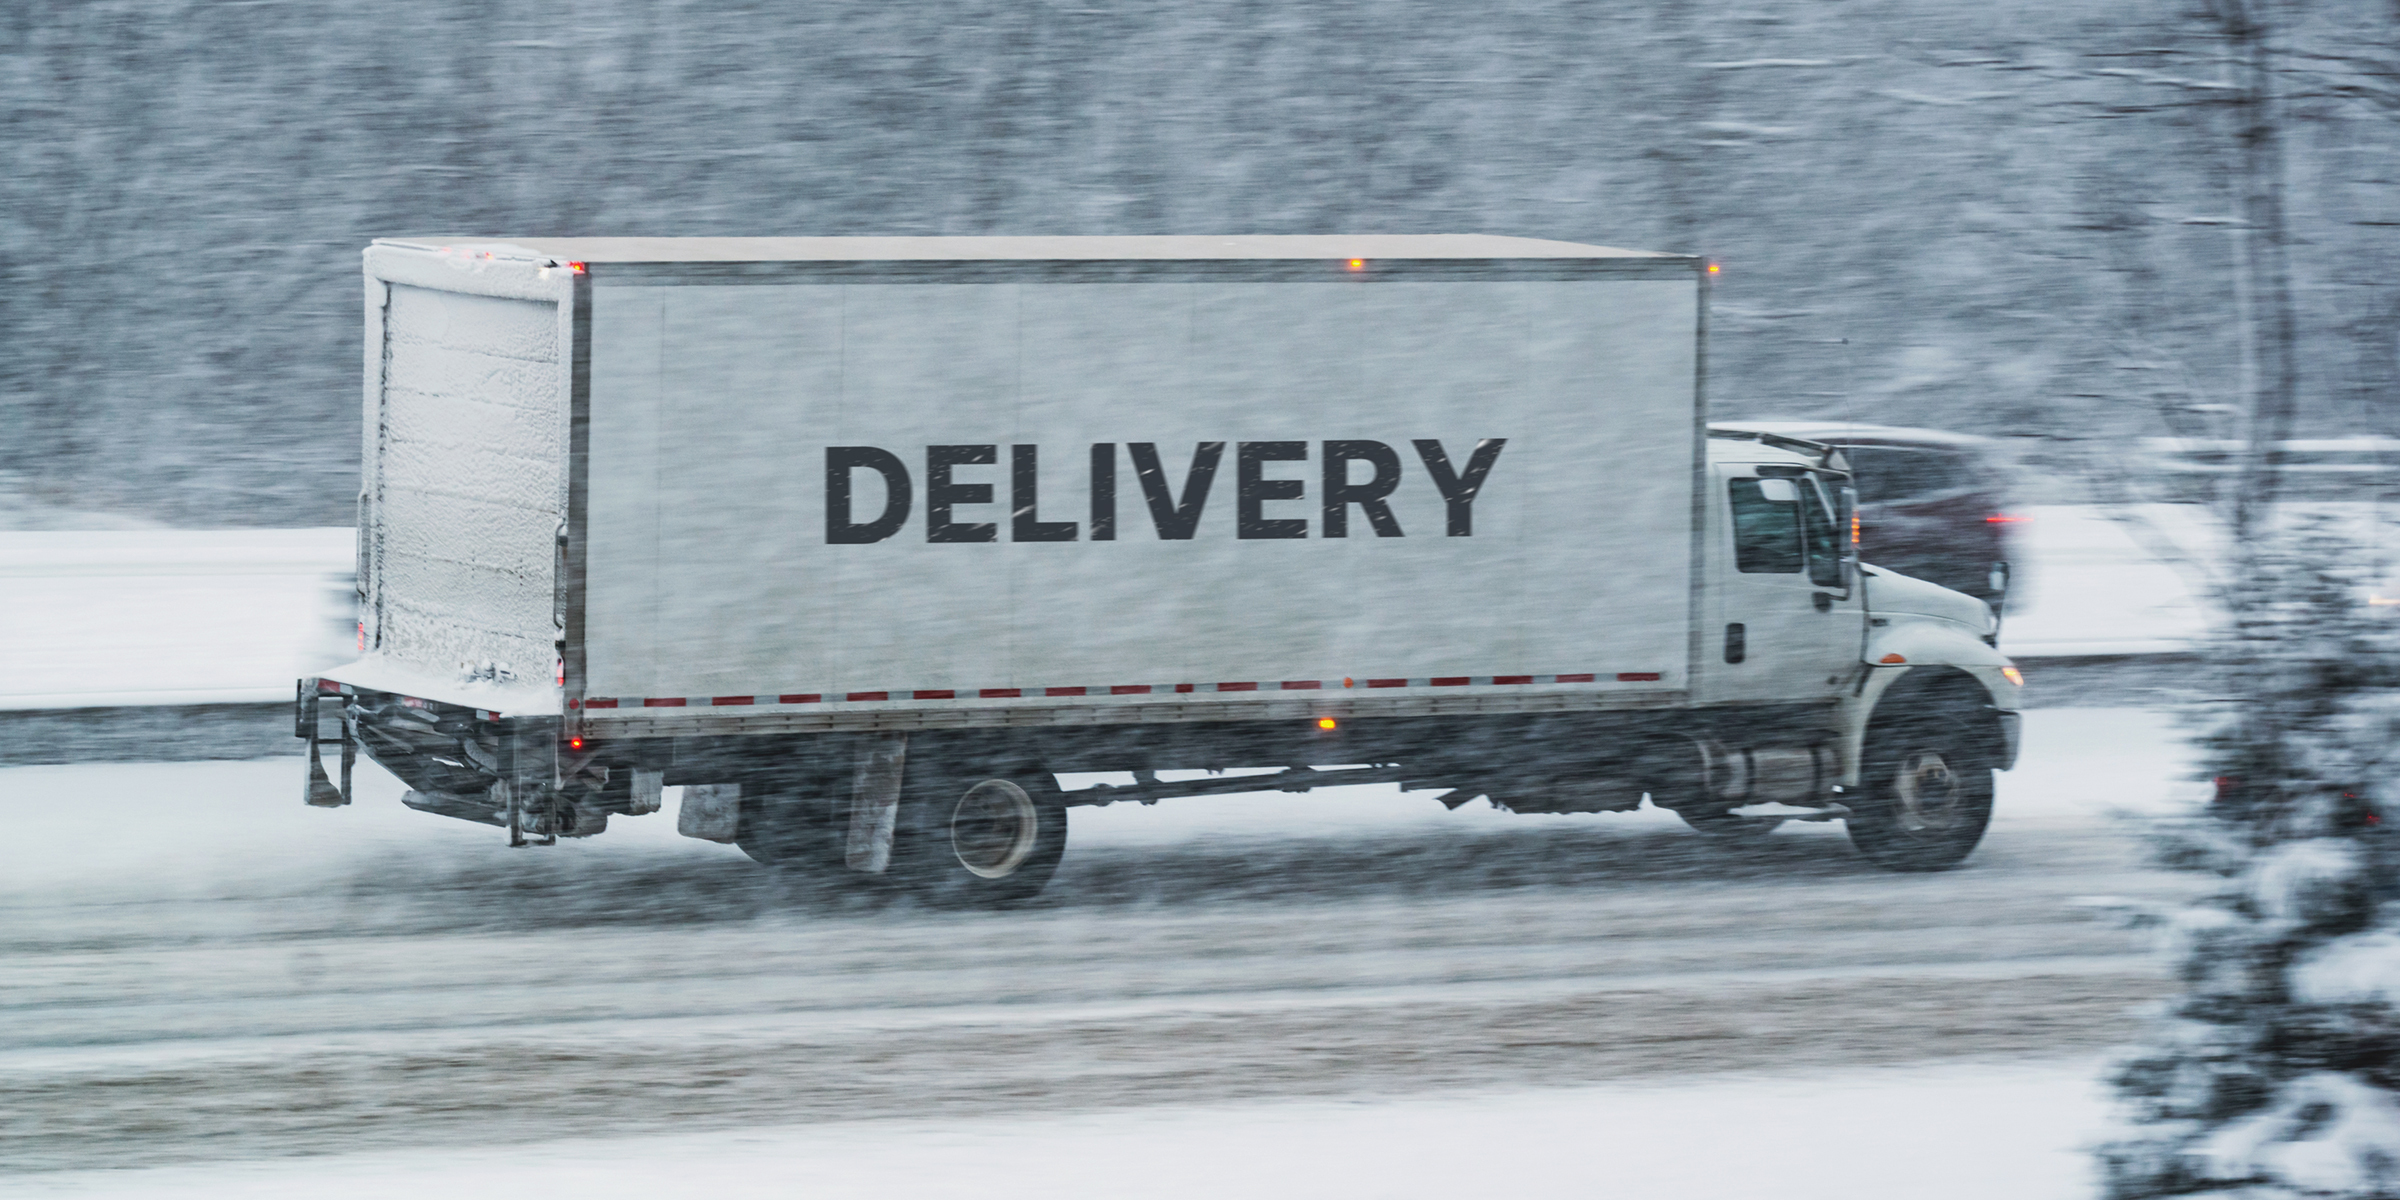 Delivery on a snowy road | Source: Shutterstock